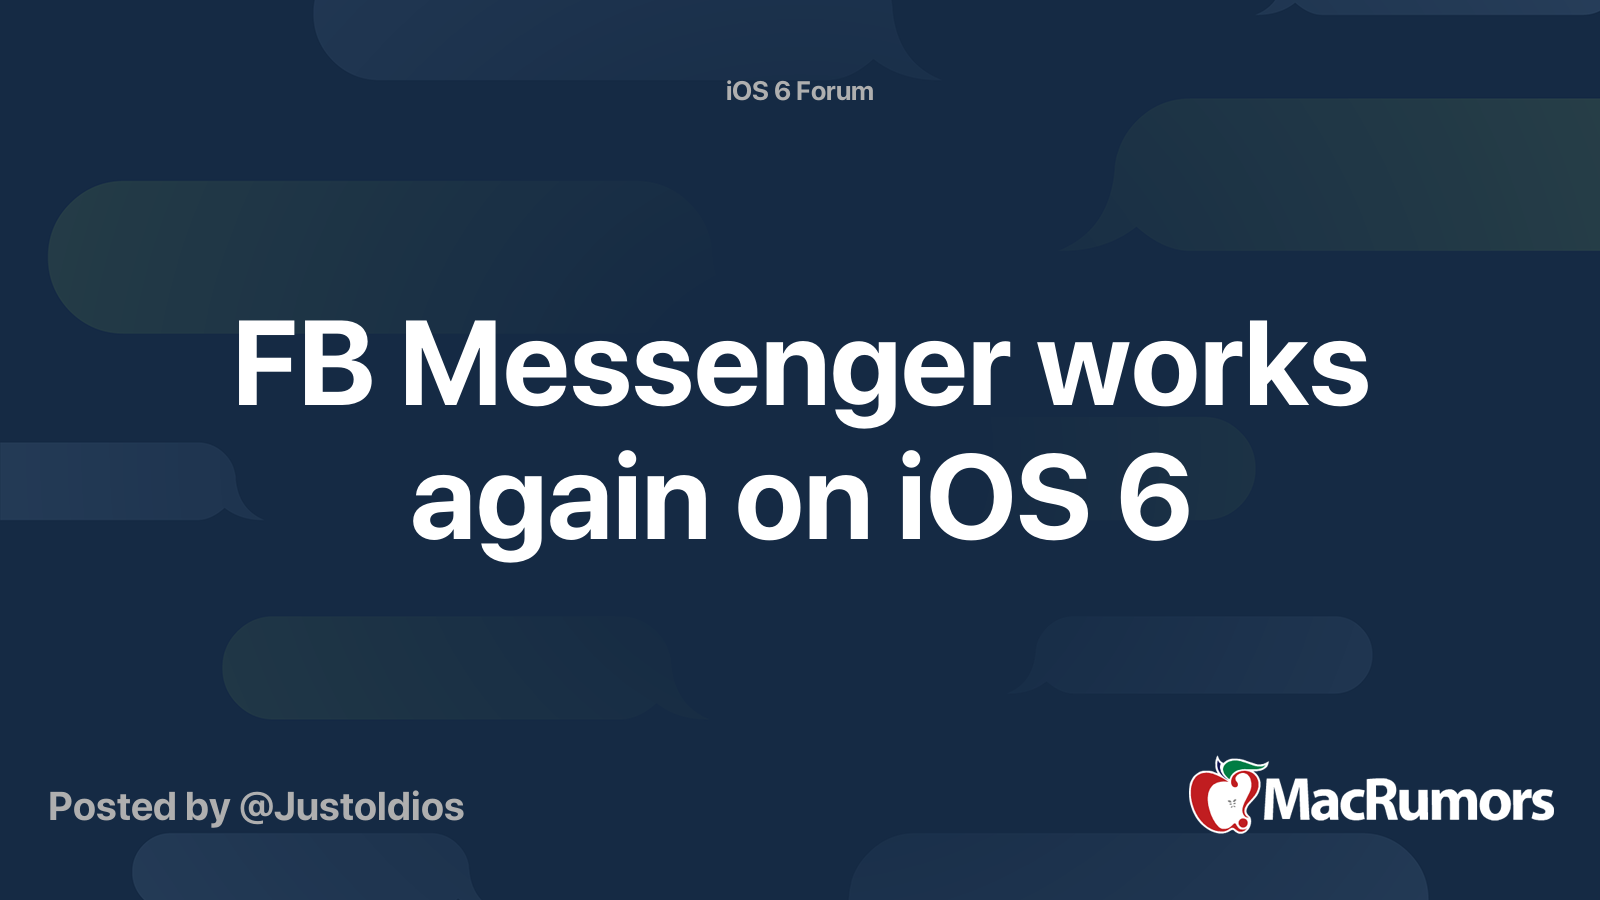 discussion] hello. i downgraded my iphone 4s to ios 9 to ios 6. works  , facebook. but the messenger doesn't work, it's hard to fix. I also  installed other tweaks, but the